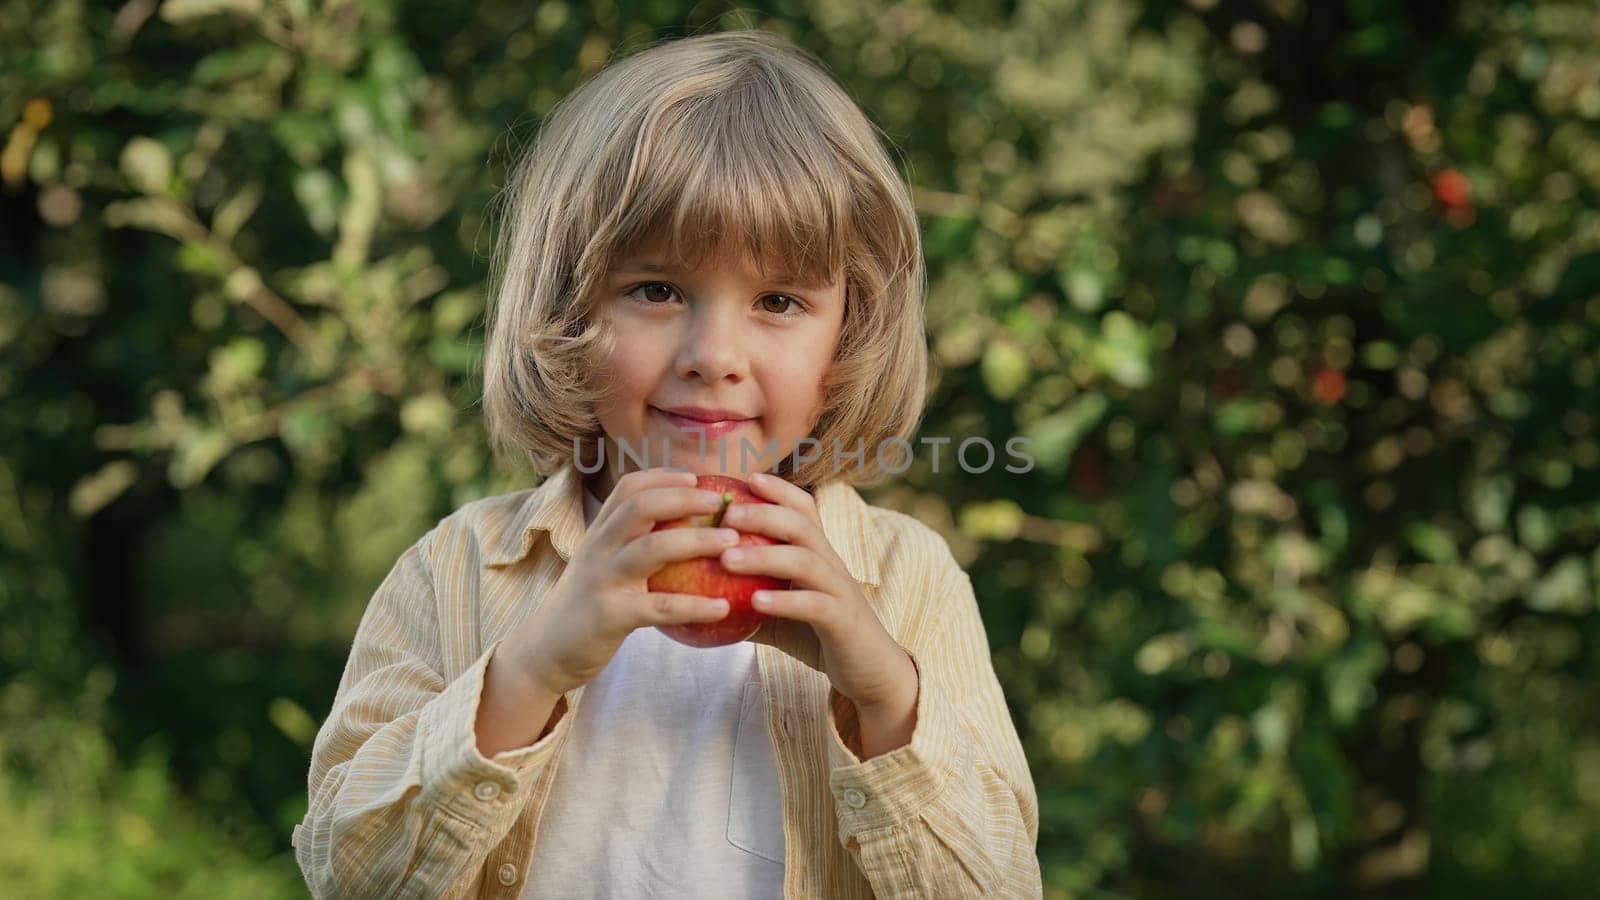 Cute little toddler boy eating ripe red apple in beautiful garden. Son explores plants, nature in autumn. Amazing scene with kid. Childhood concept